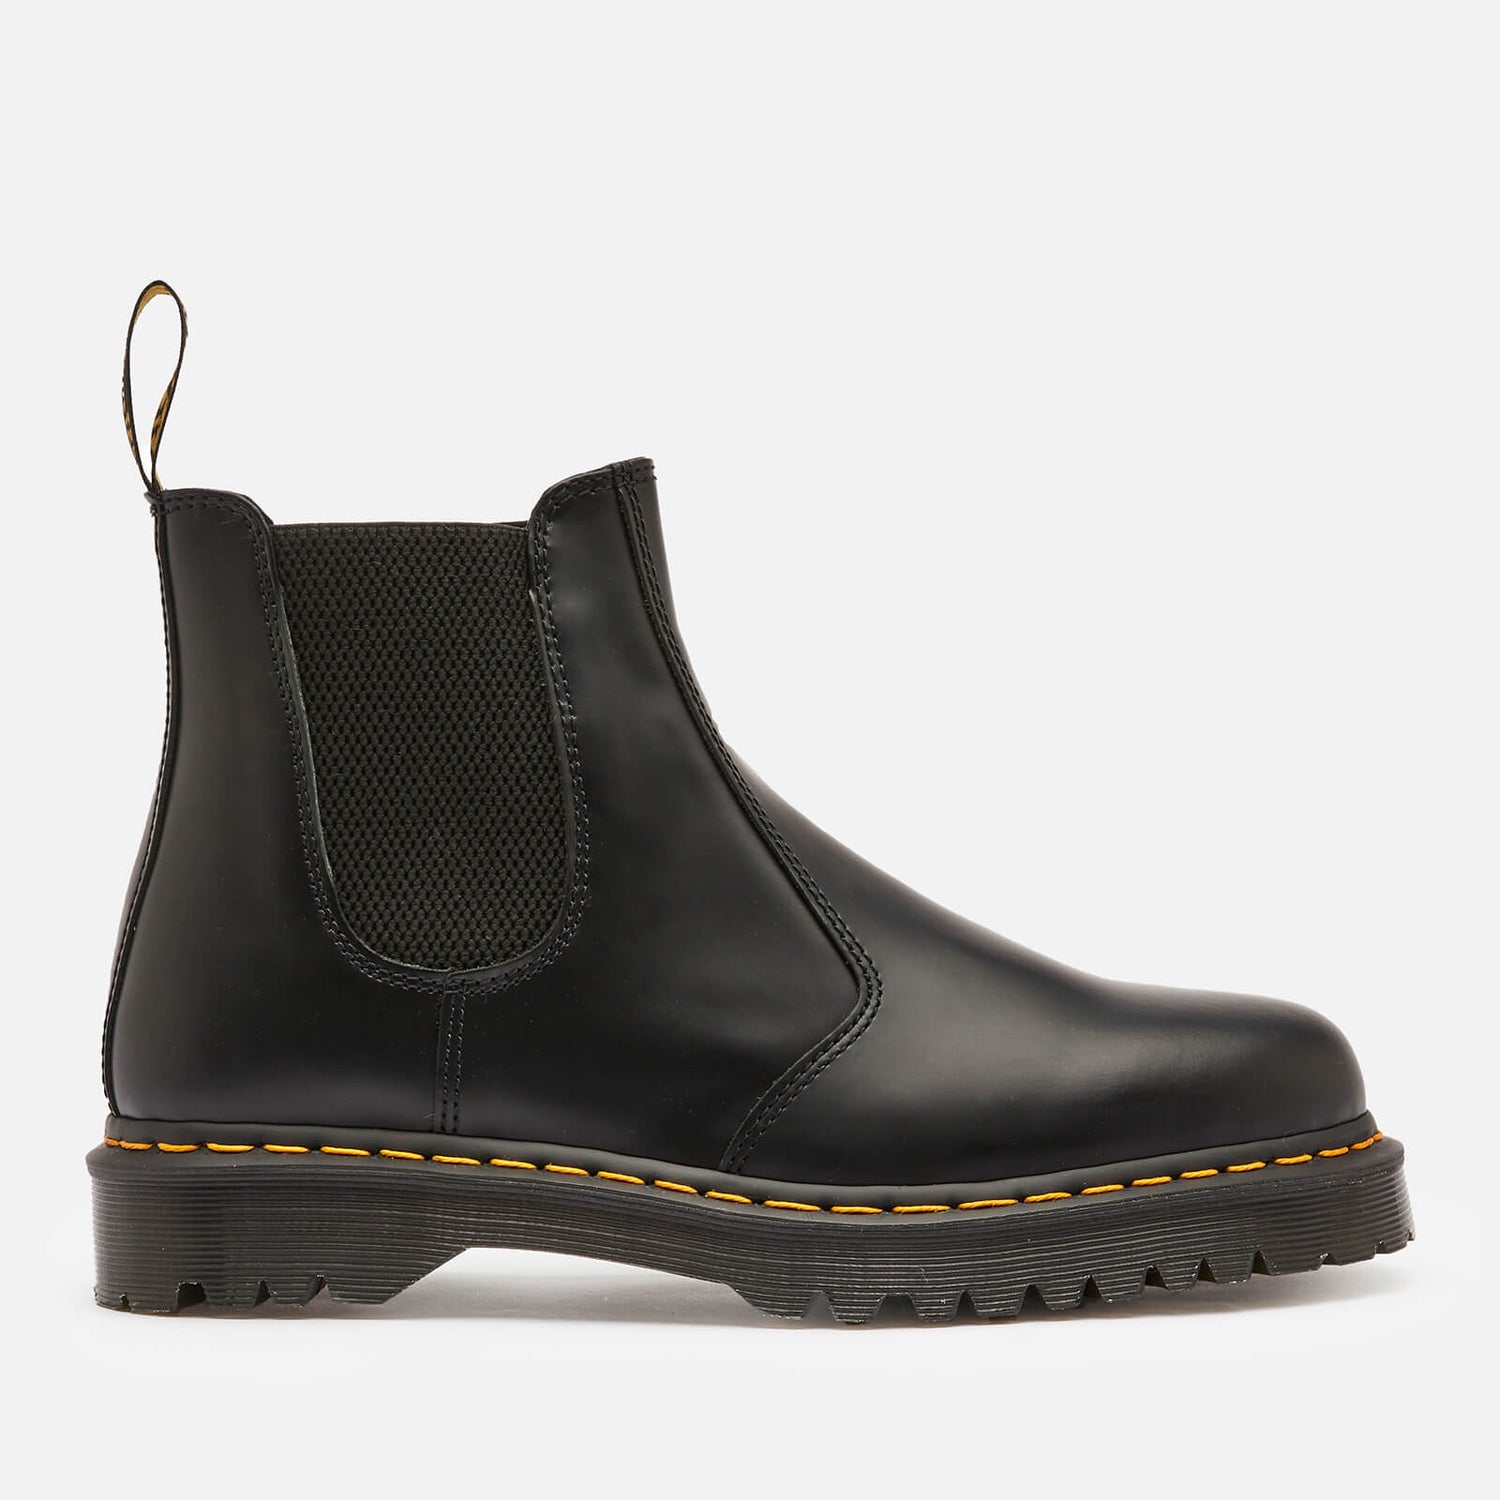 Dr. Martens 2976 Bex Smooth Leather Chelsea Boots - Black - UK 3